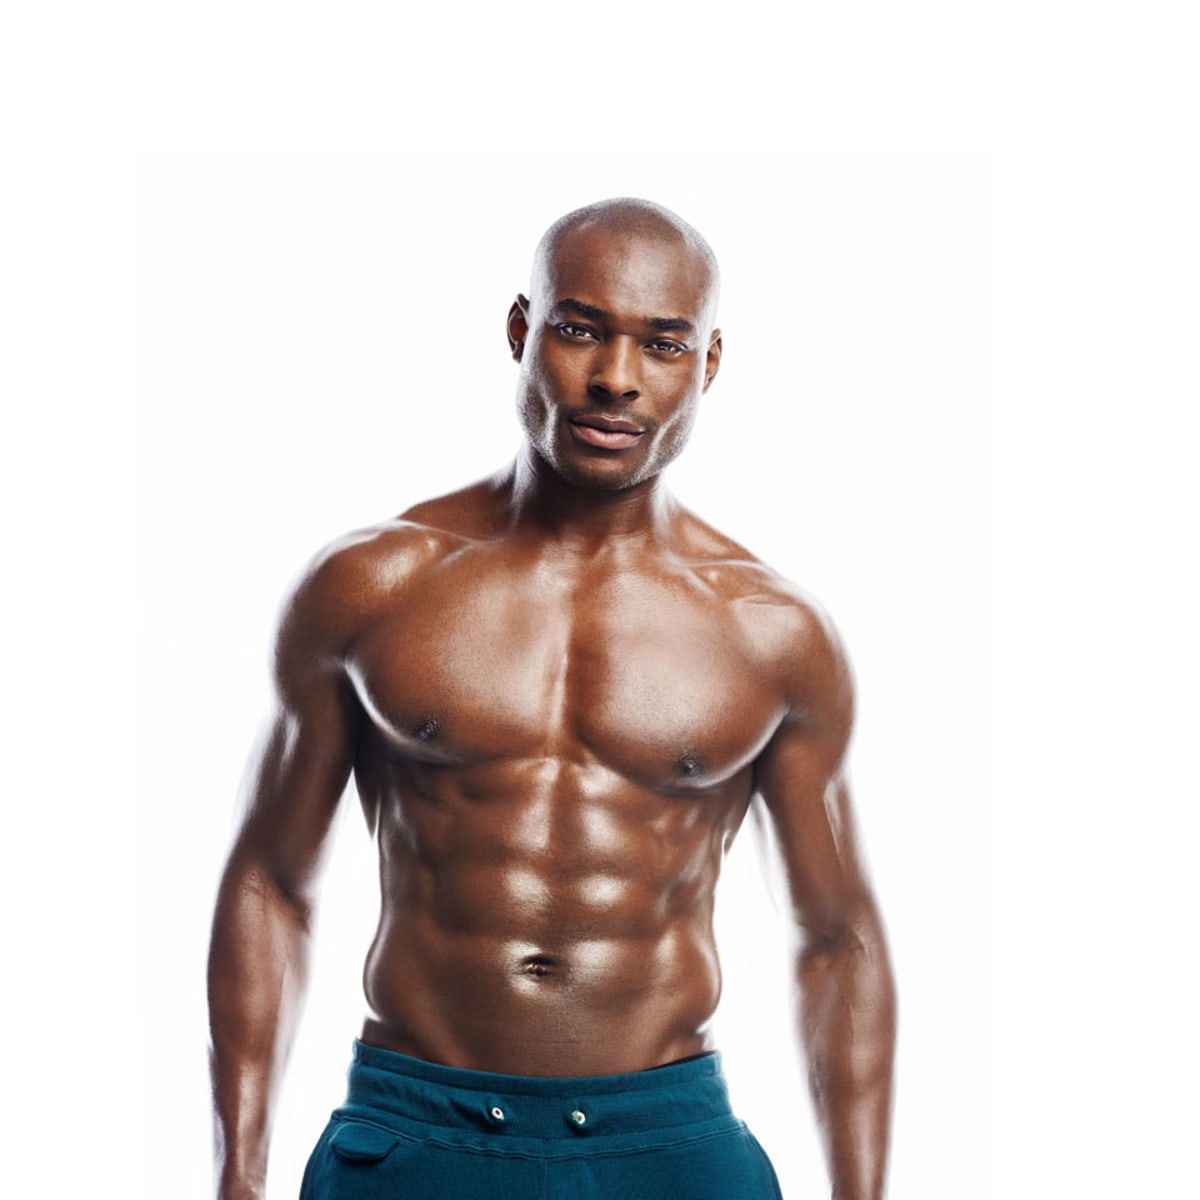 8 Best Moves to Train Your Chest and Abs